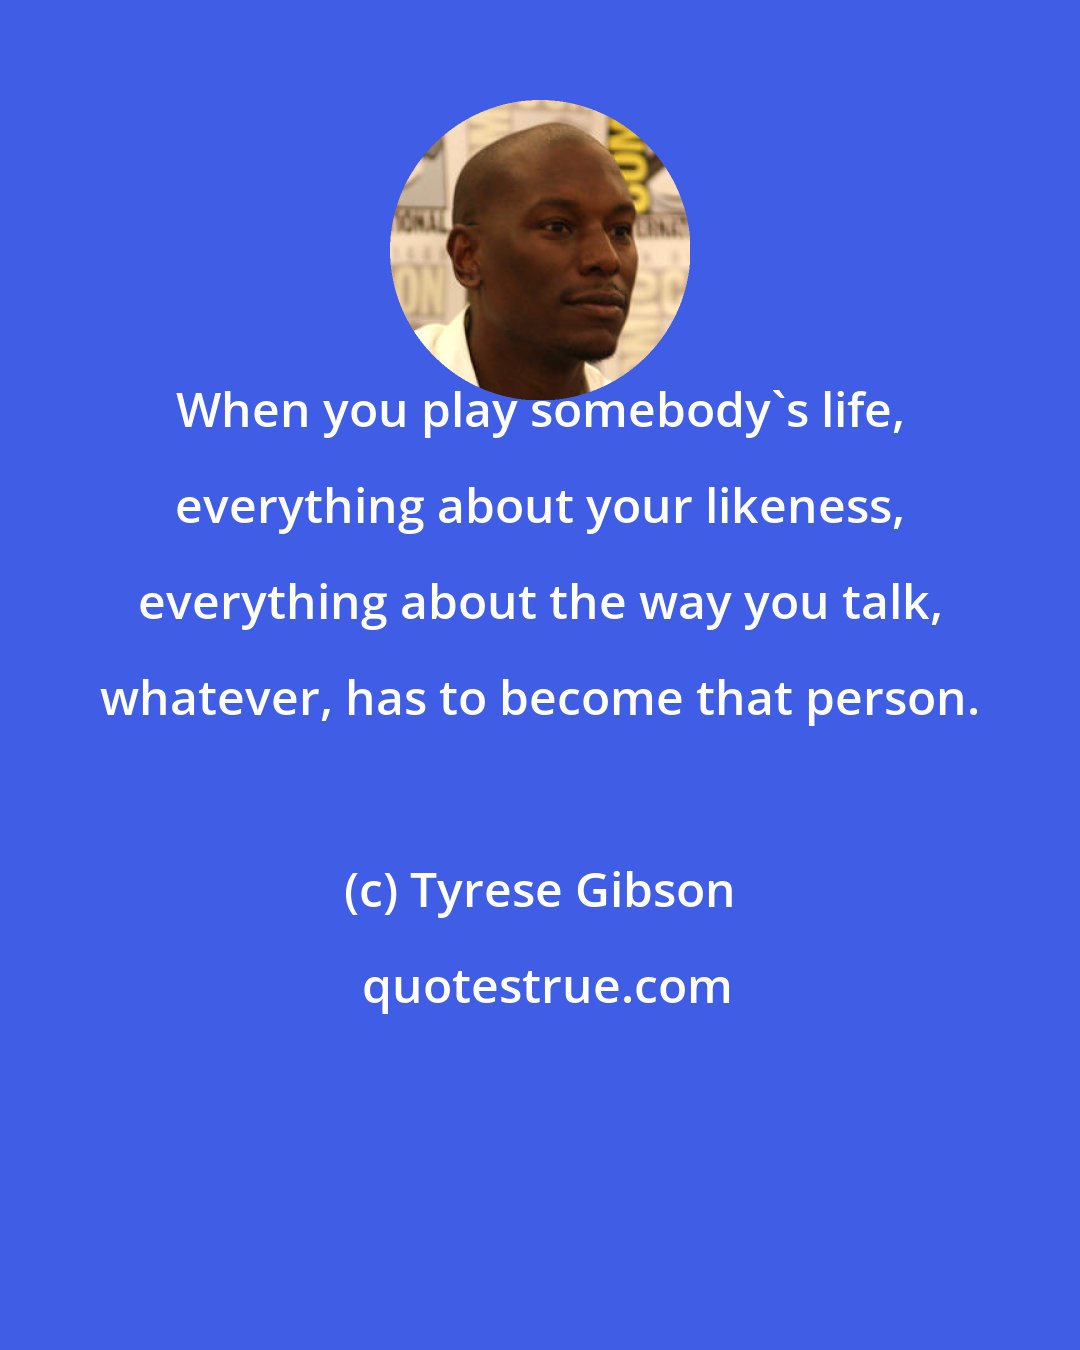 Tyrese Gibson: When you play somebody's life, everything about your likeness, everything about the way you talk, whatever, has to become that person.